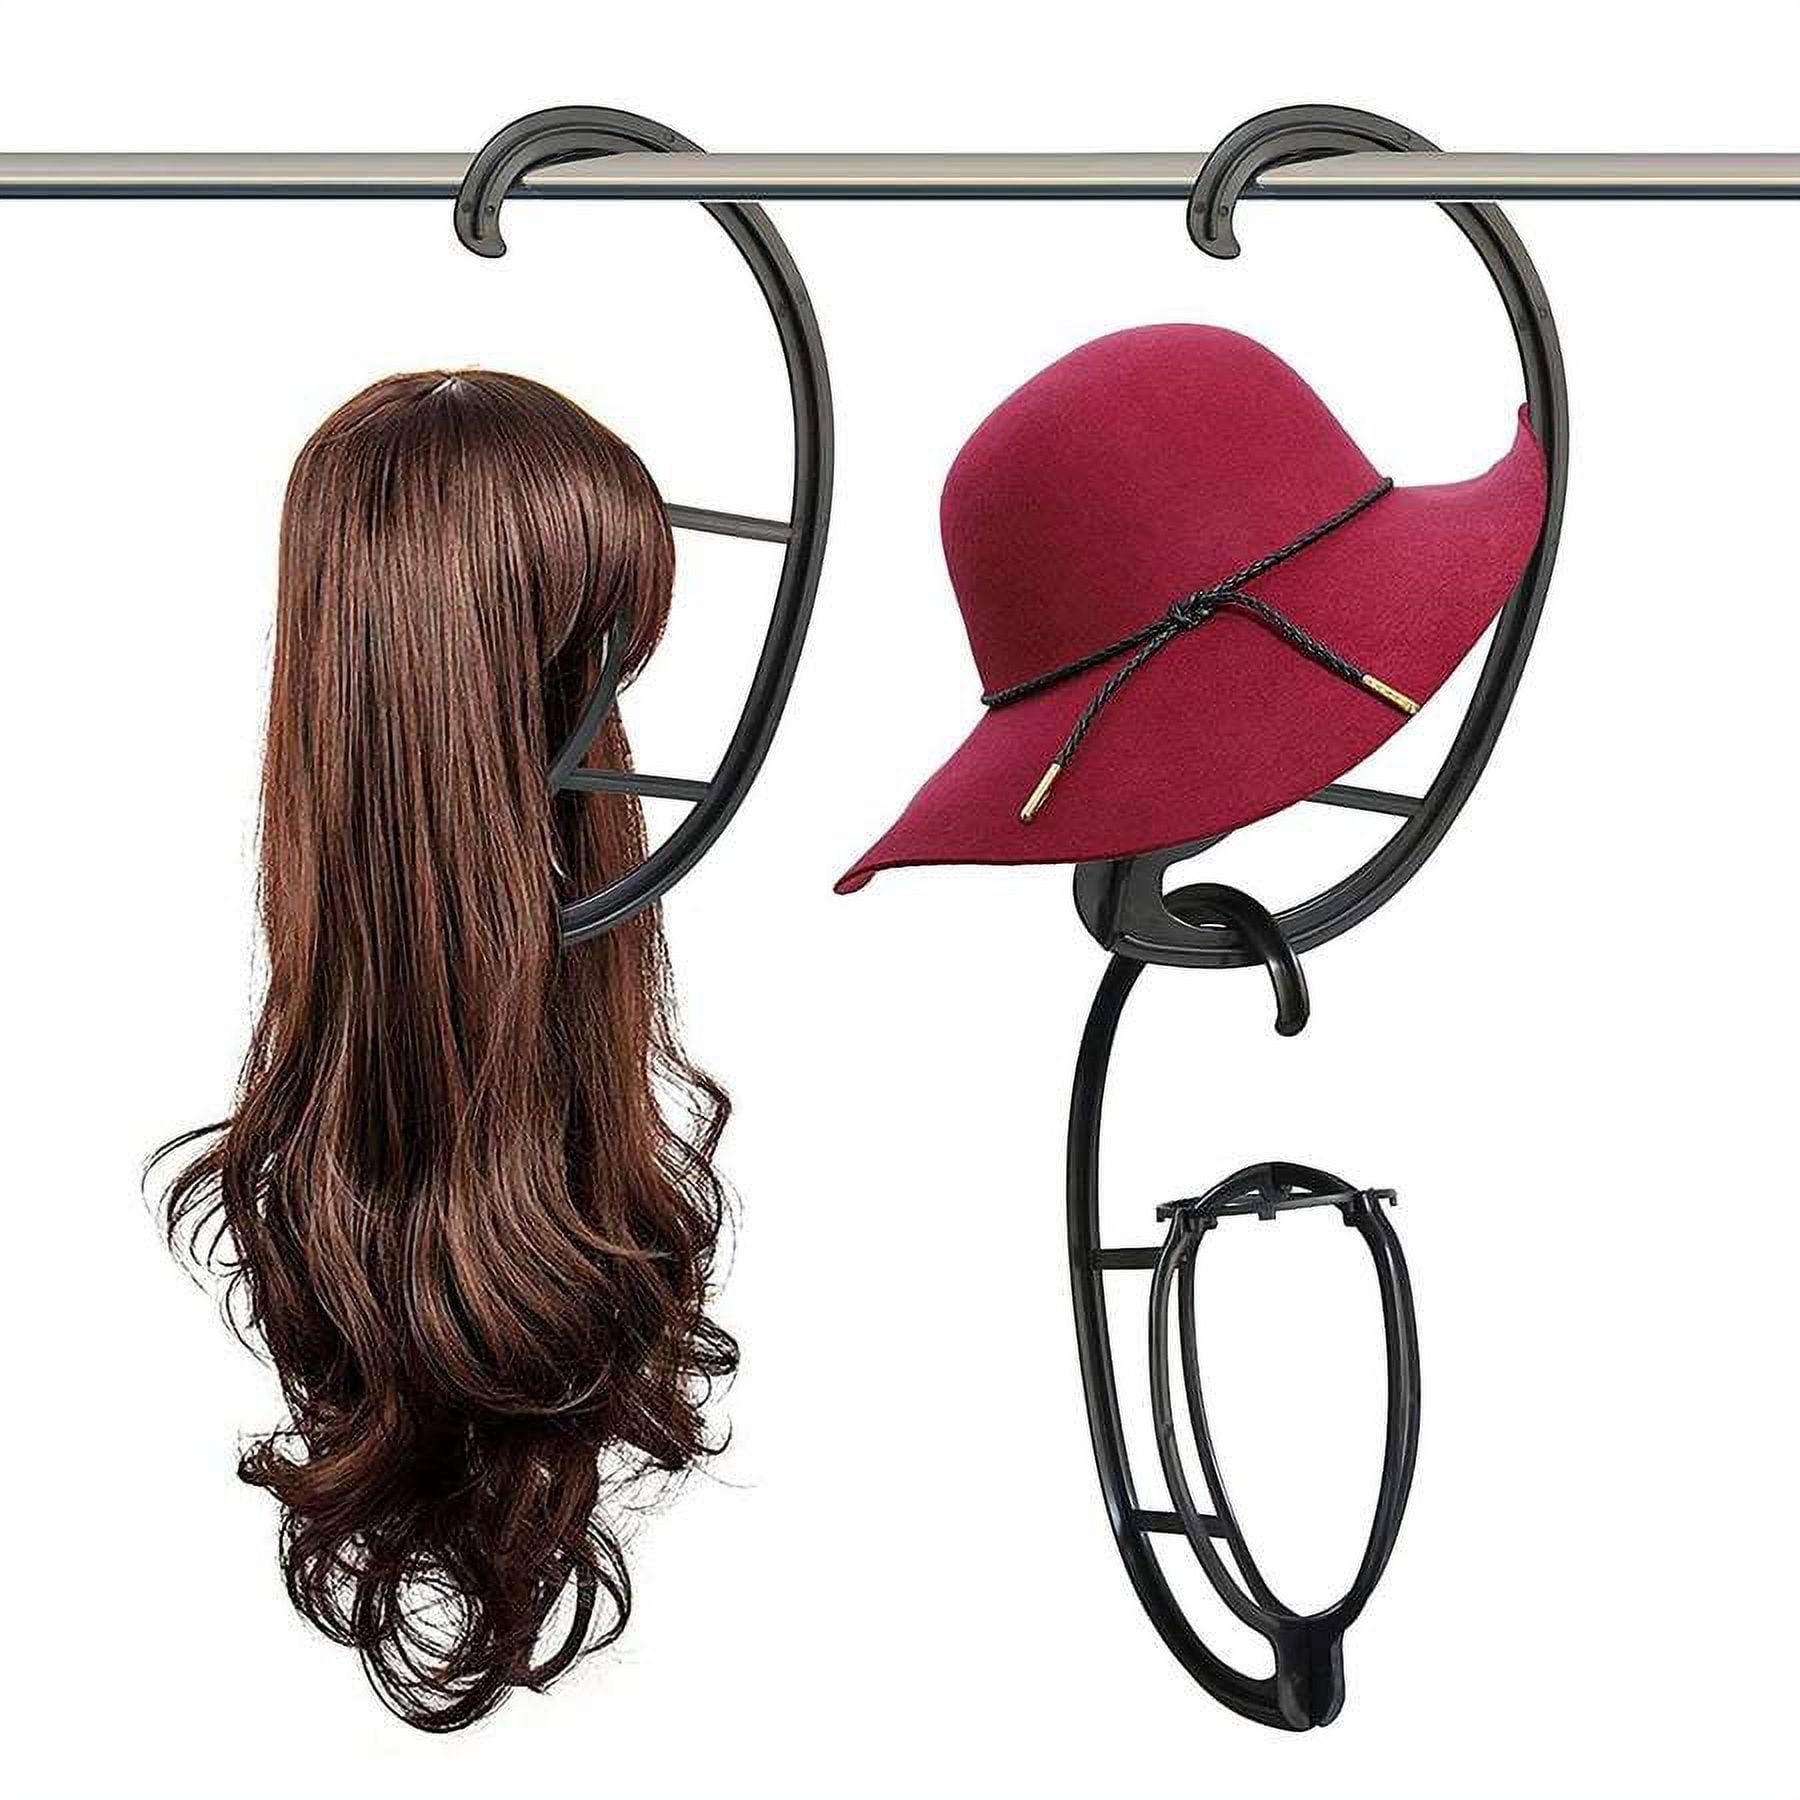 Hanging Wig Stand, 2 Pcs Portable Black/ White Wig Hanger For Display Wigs  And Hats, Collapsible Wig Display Holder Tool